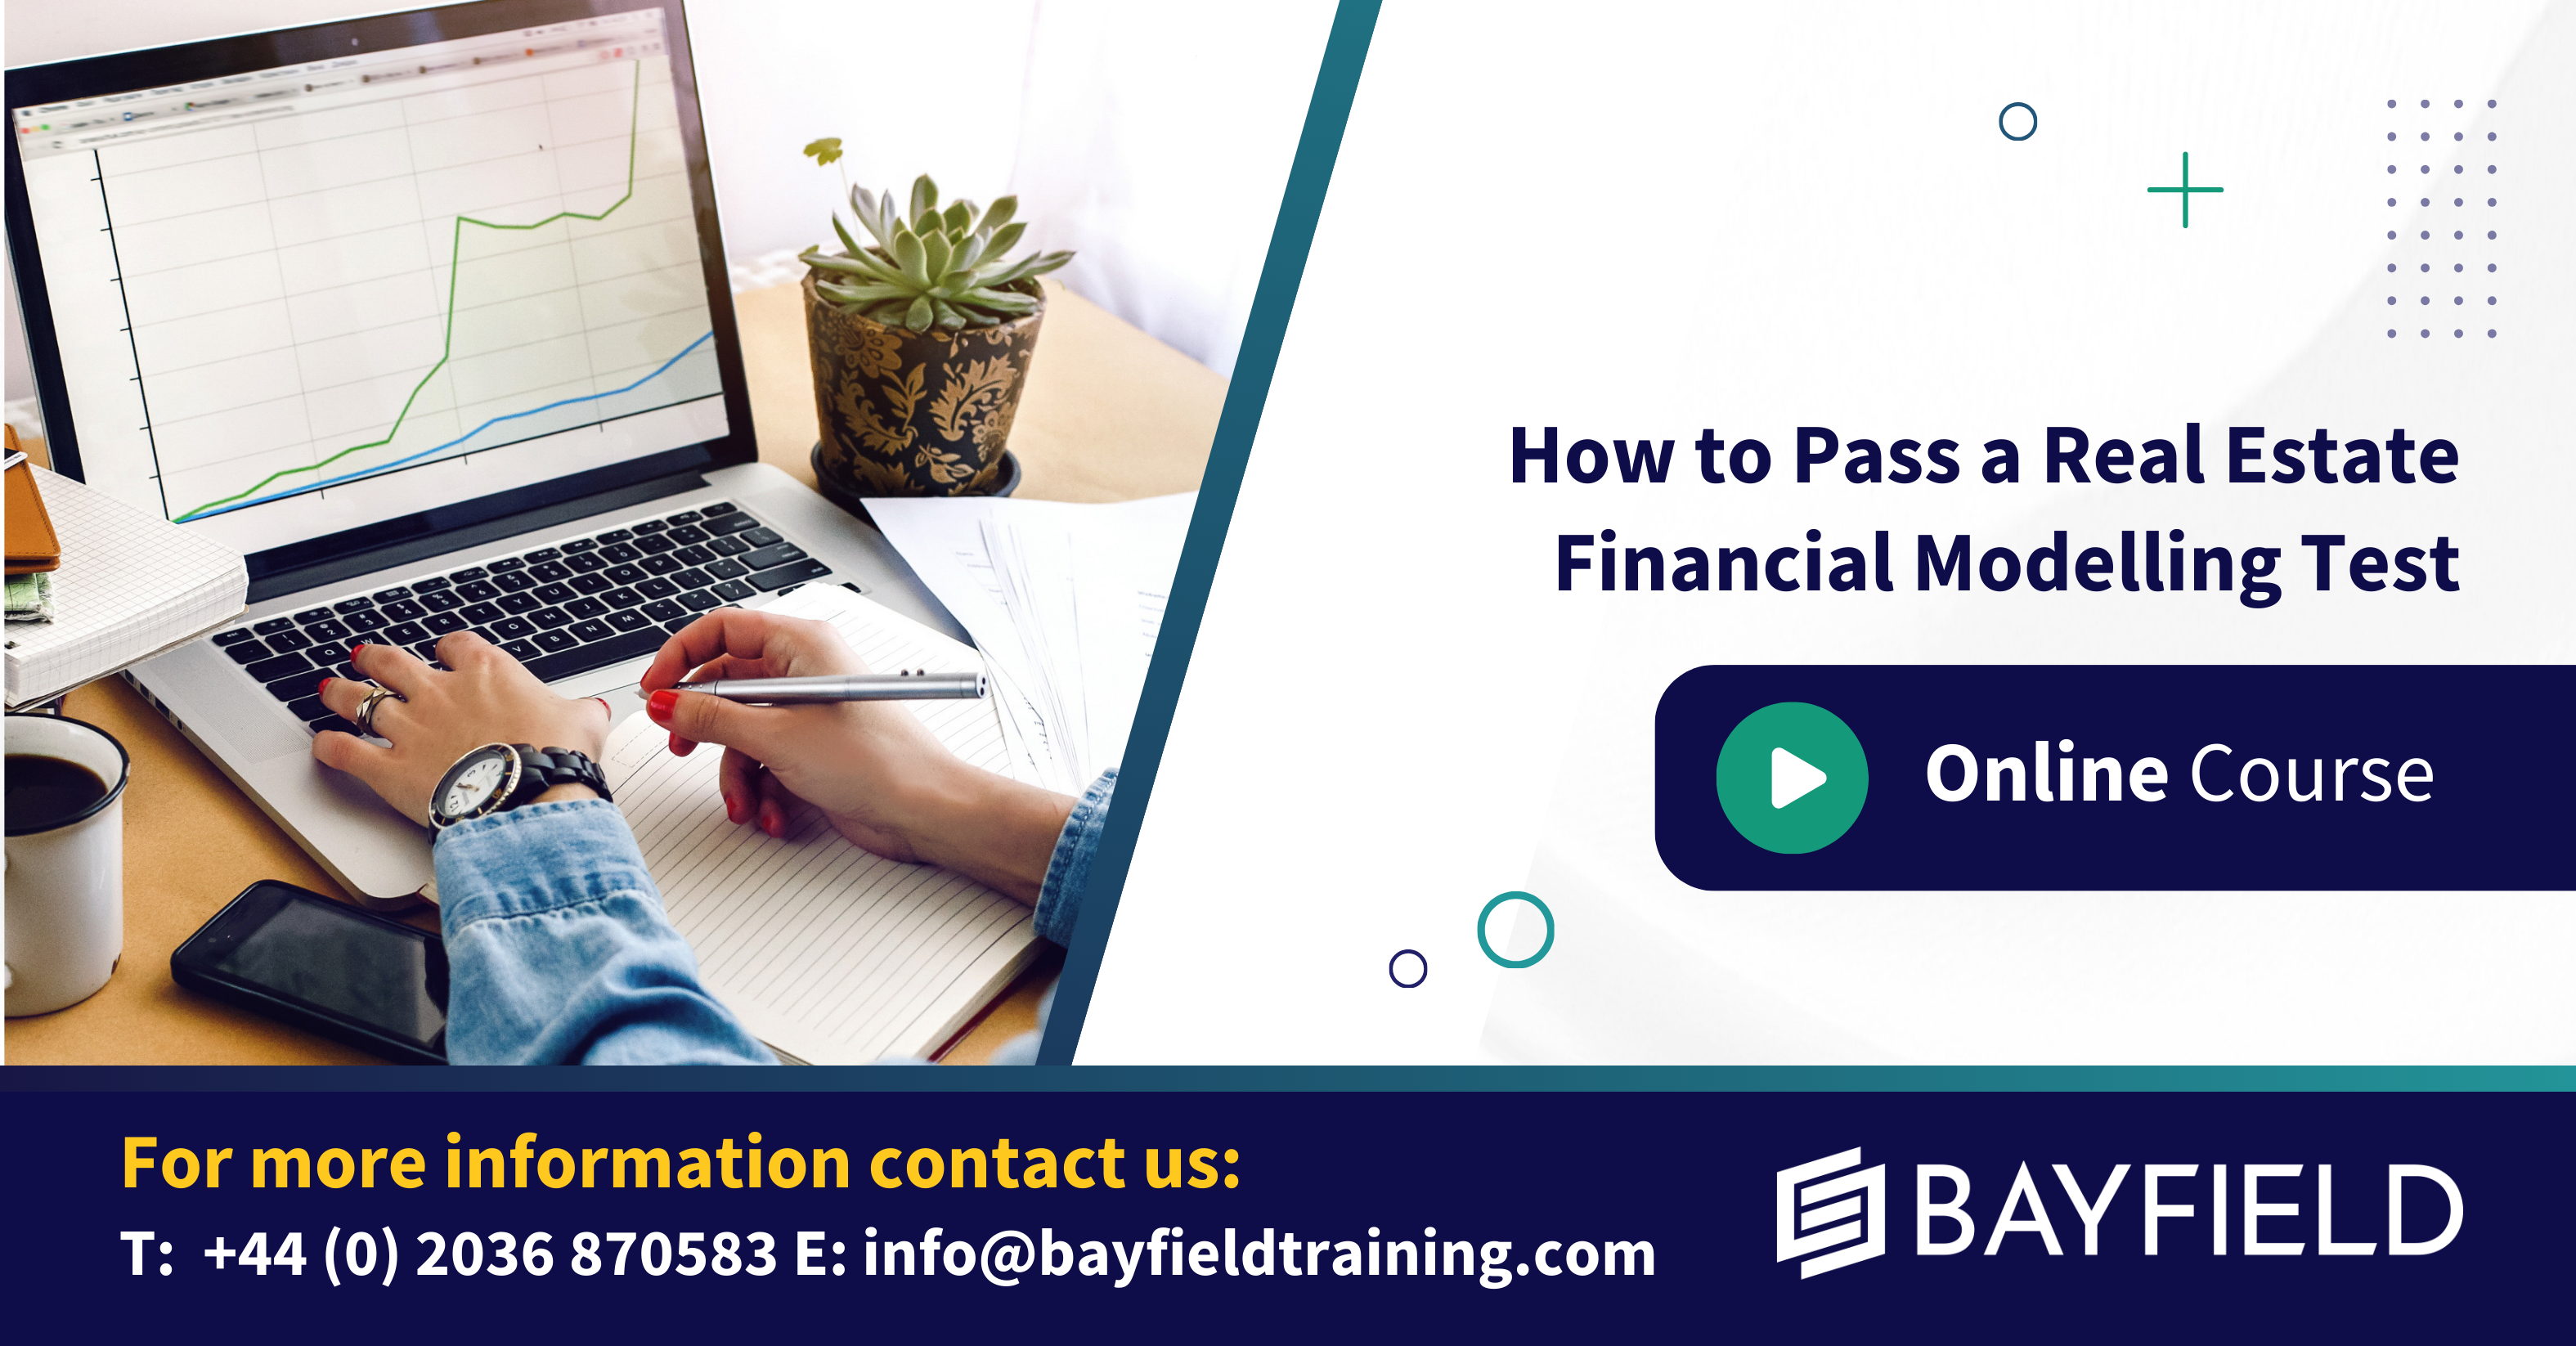 How to Pass a Real Estate Financial Modelling Test